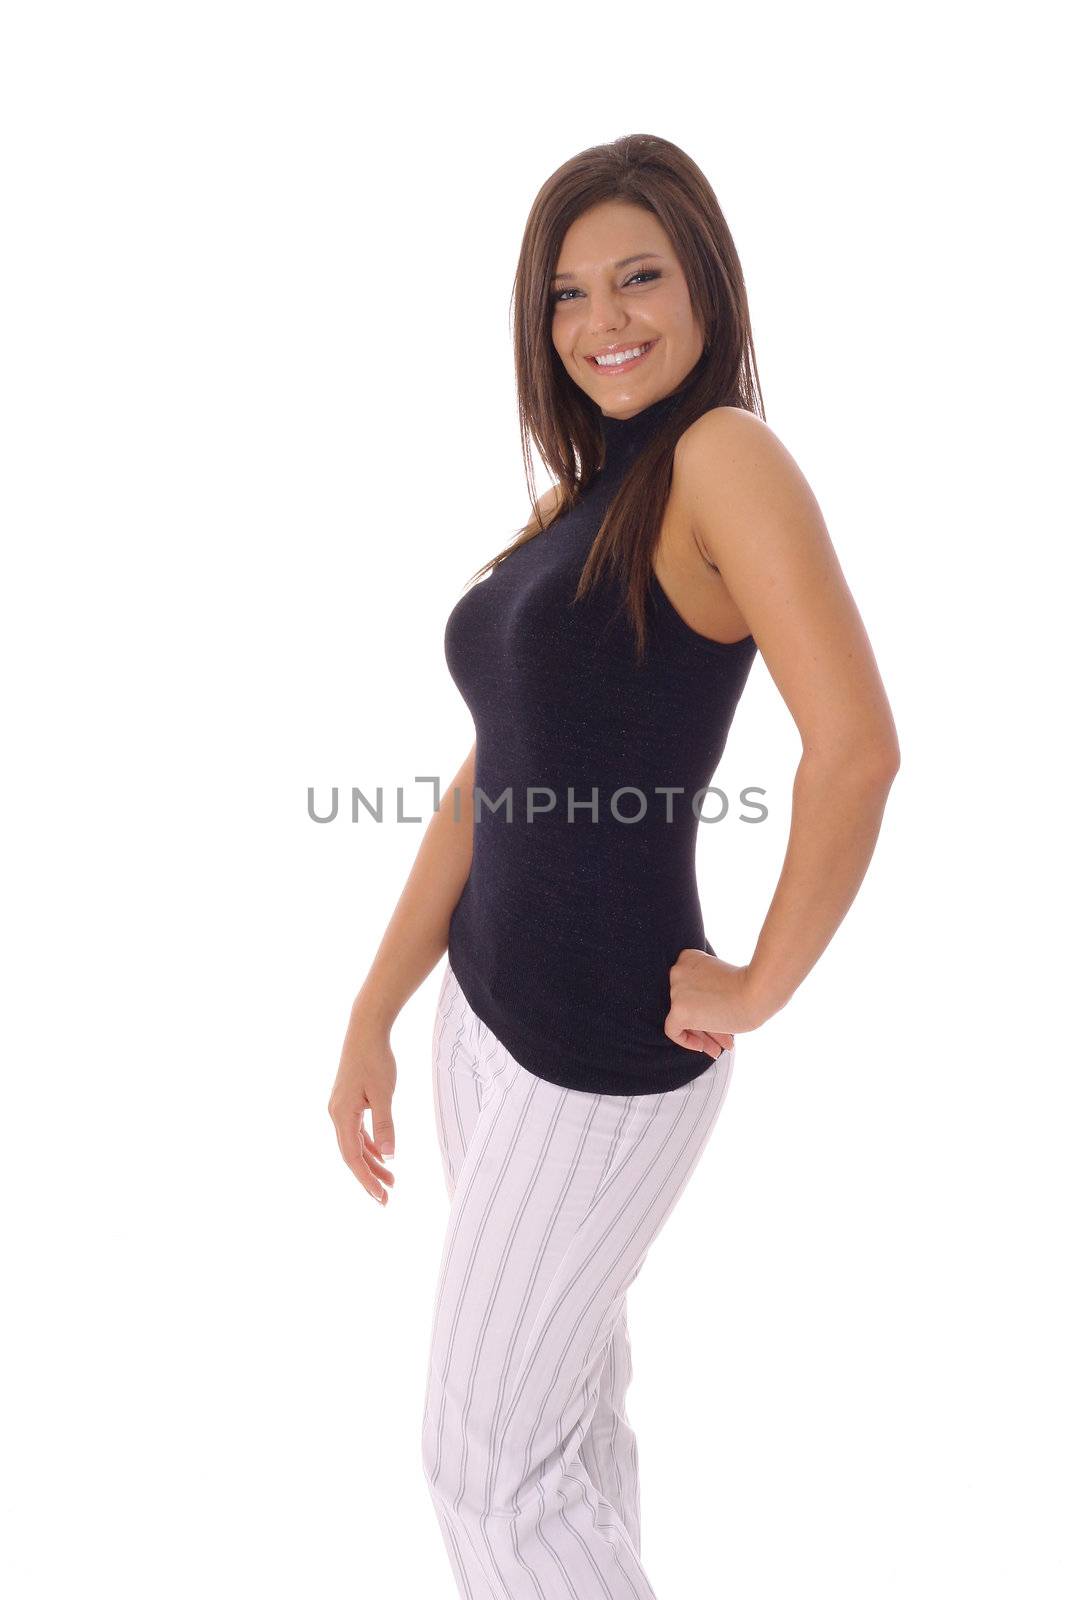 shot of a model posing on white by creativestock